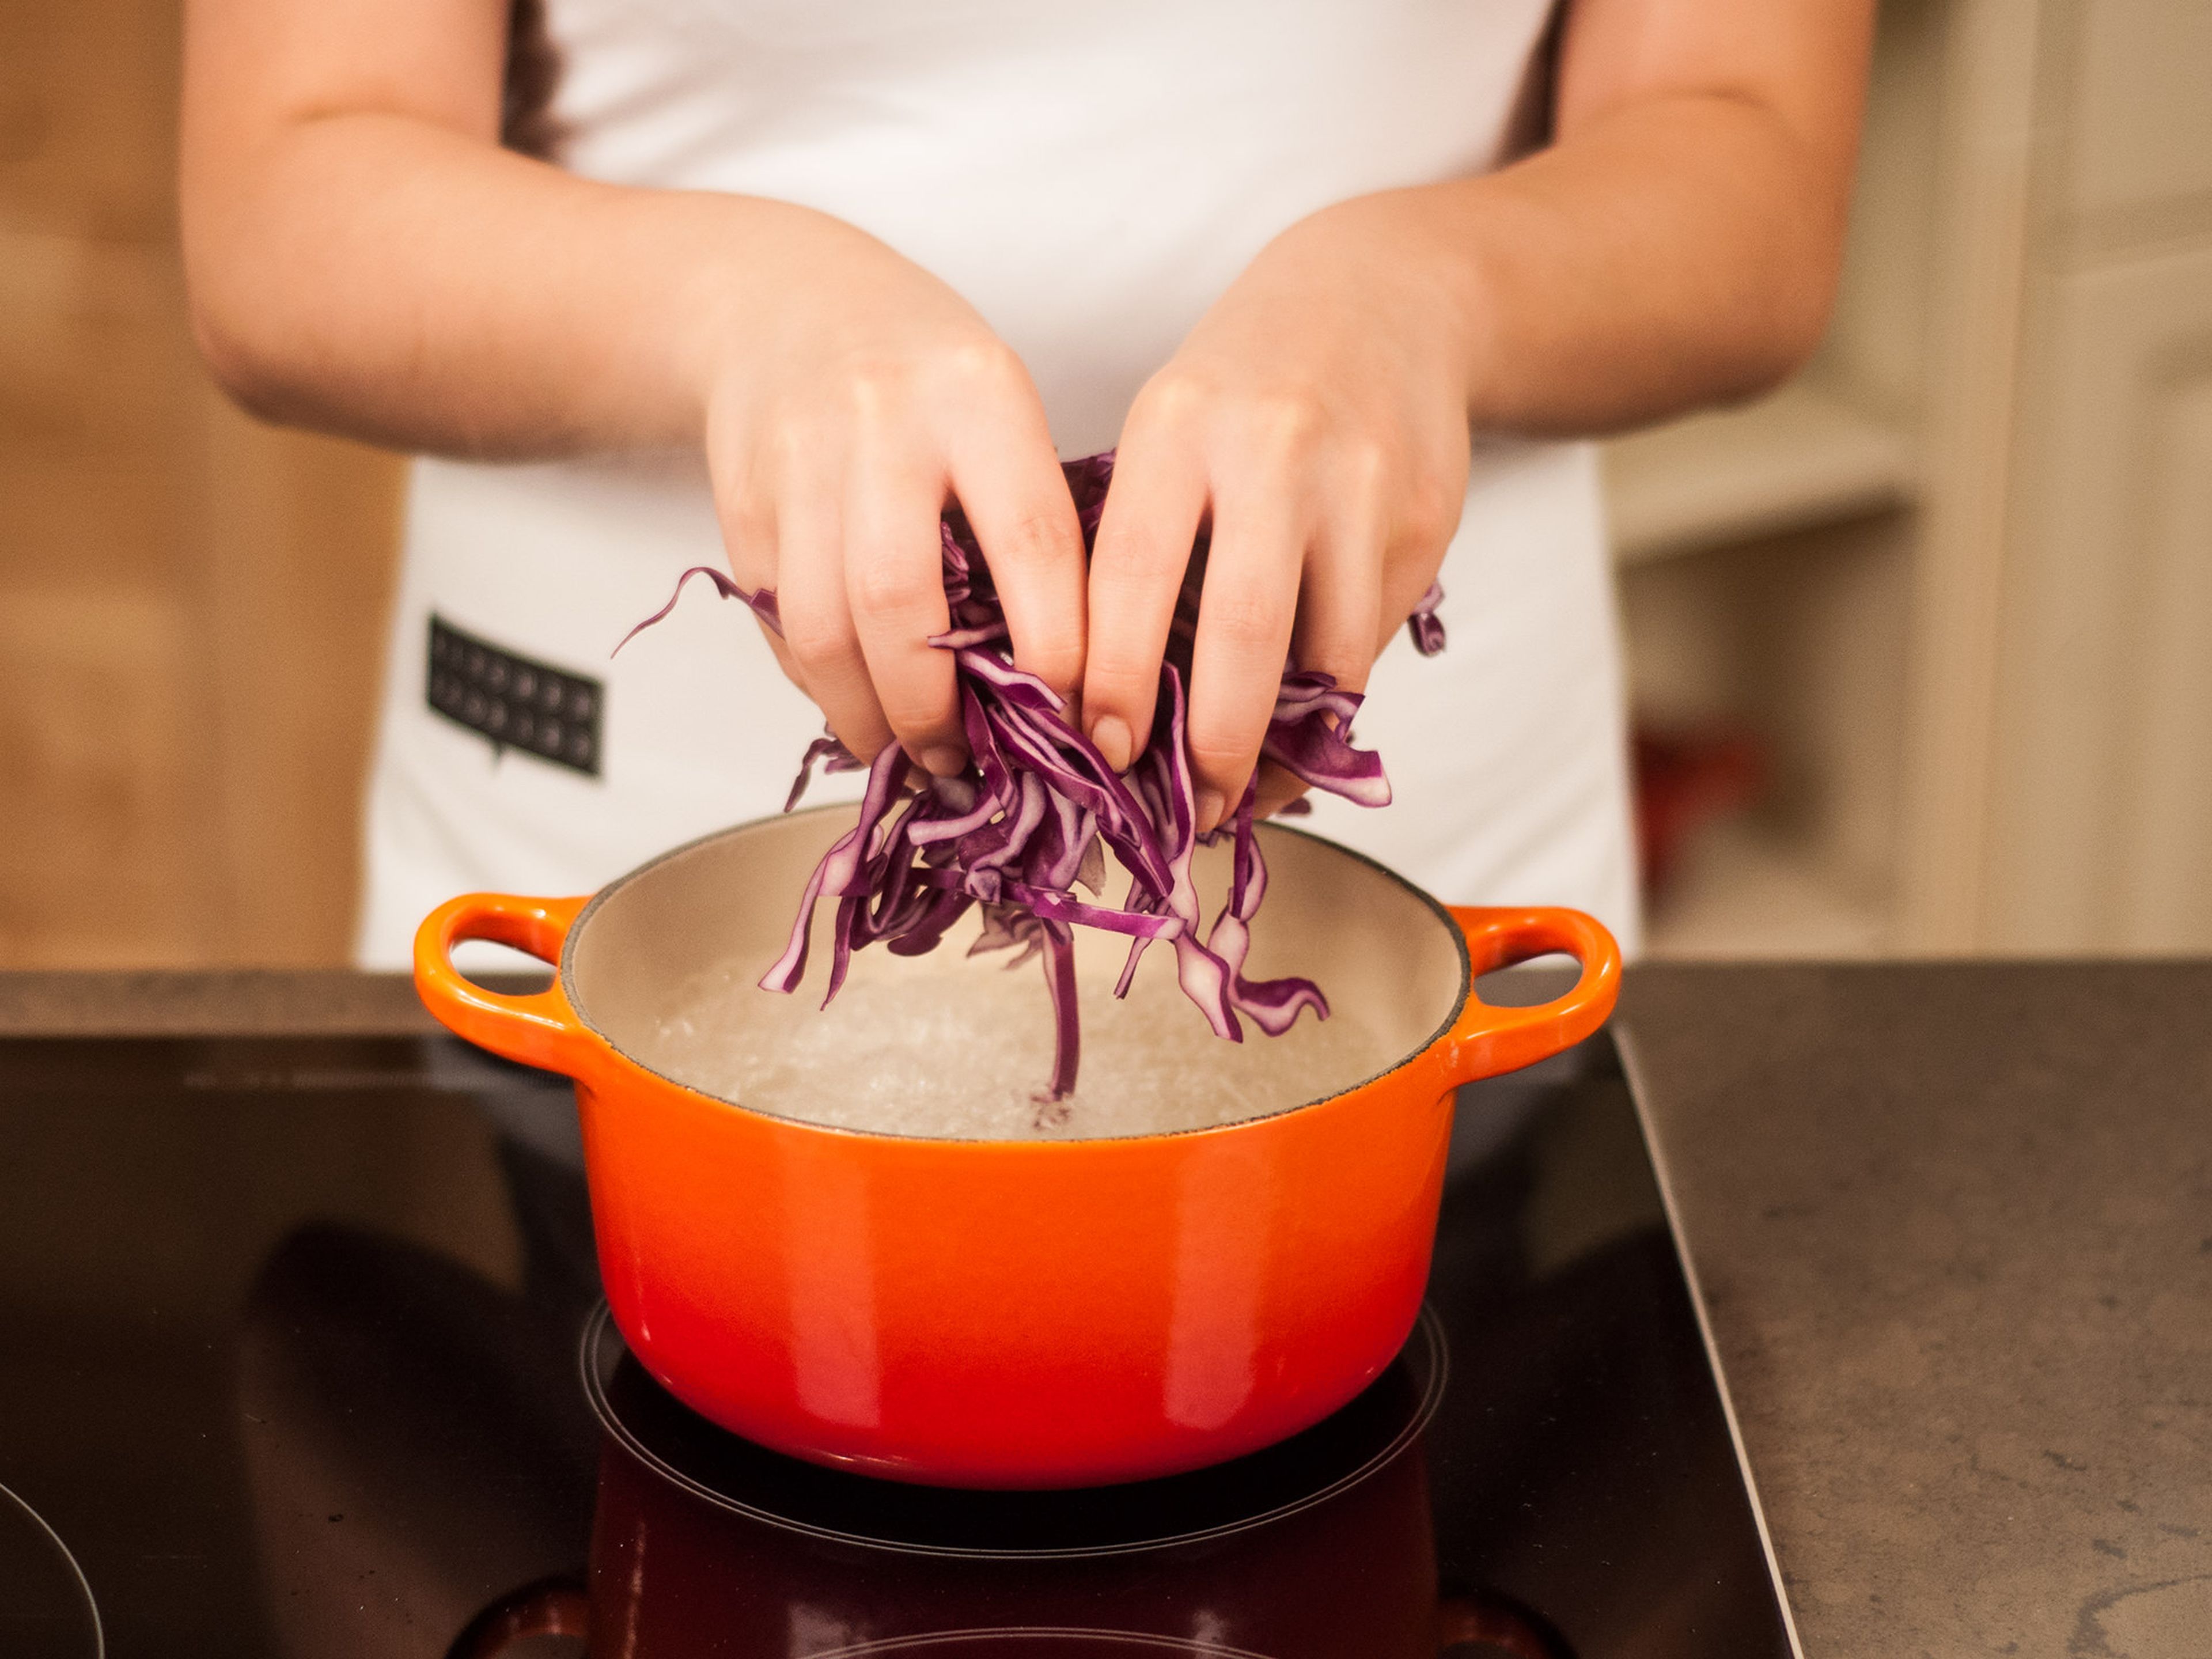 Fill half of a large saucepan with water, add some salt, and bring to a boil. Place red cabbage into boiling water and blanch for approx. 3 – 5 min. Then, drain and rinse with cold water.